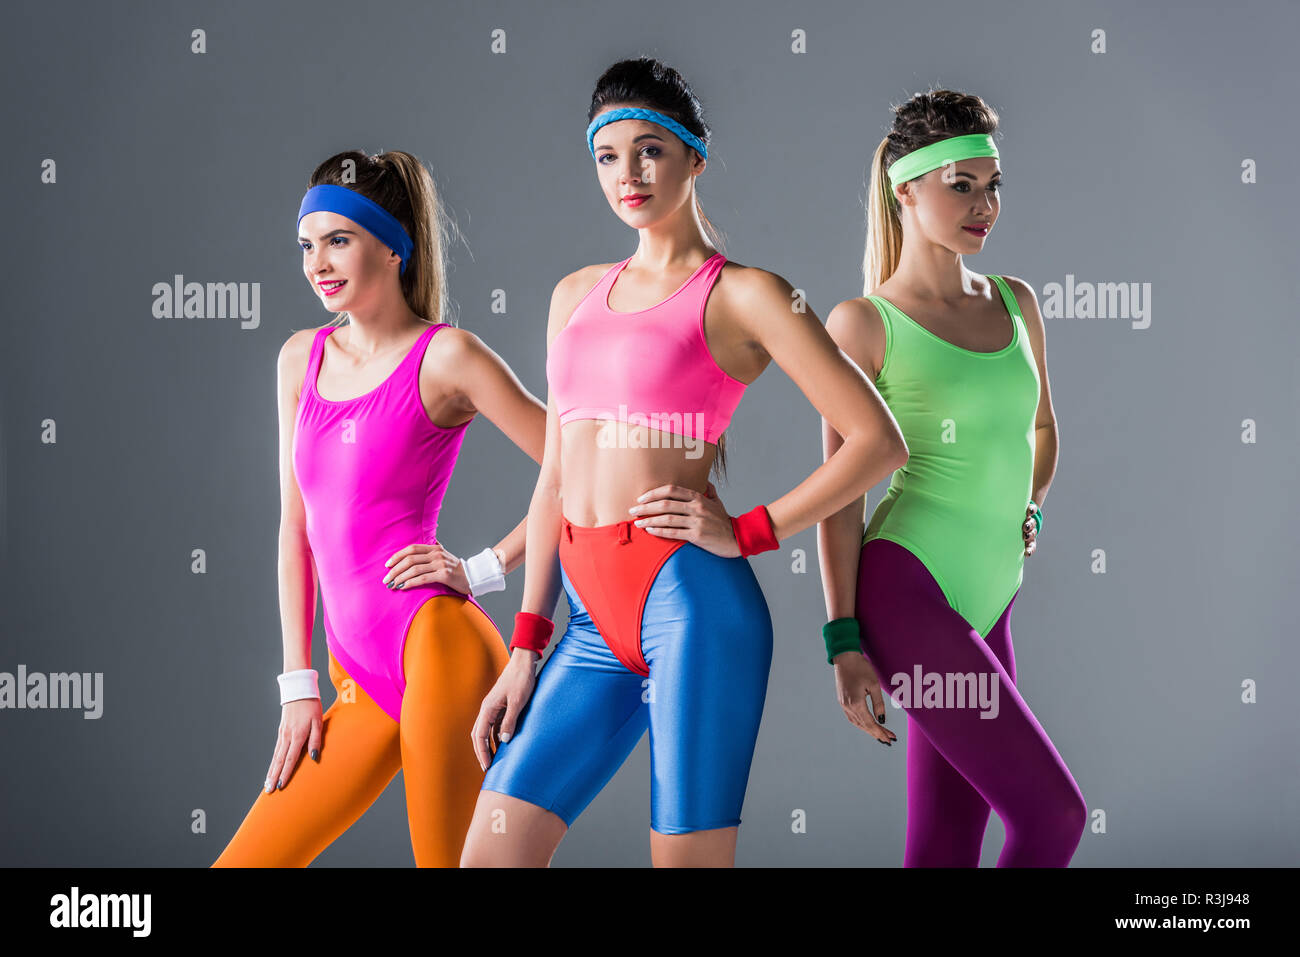 https://c8.alamy.com/comp/R3J948/beautiful-sporty-girls-in-80s-style-sportswear-posing-together-isolated-on-grey-R3J948.jpg